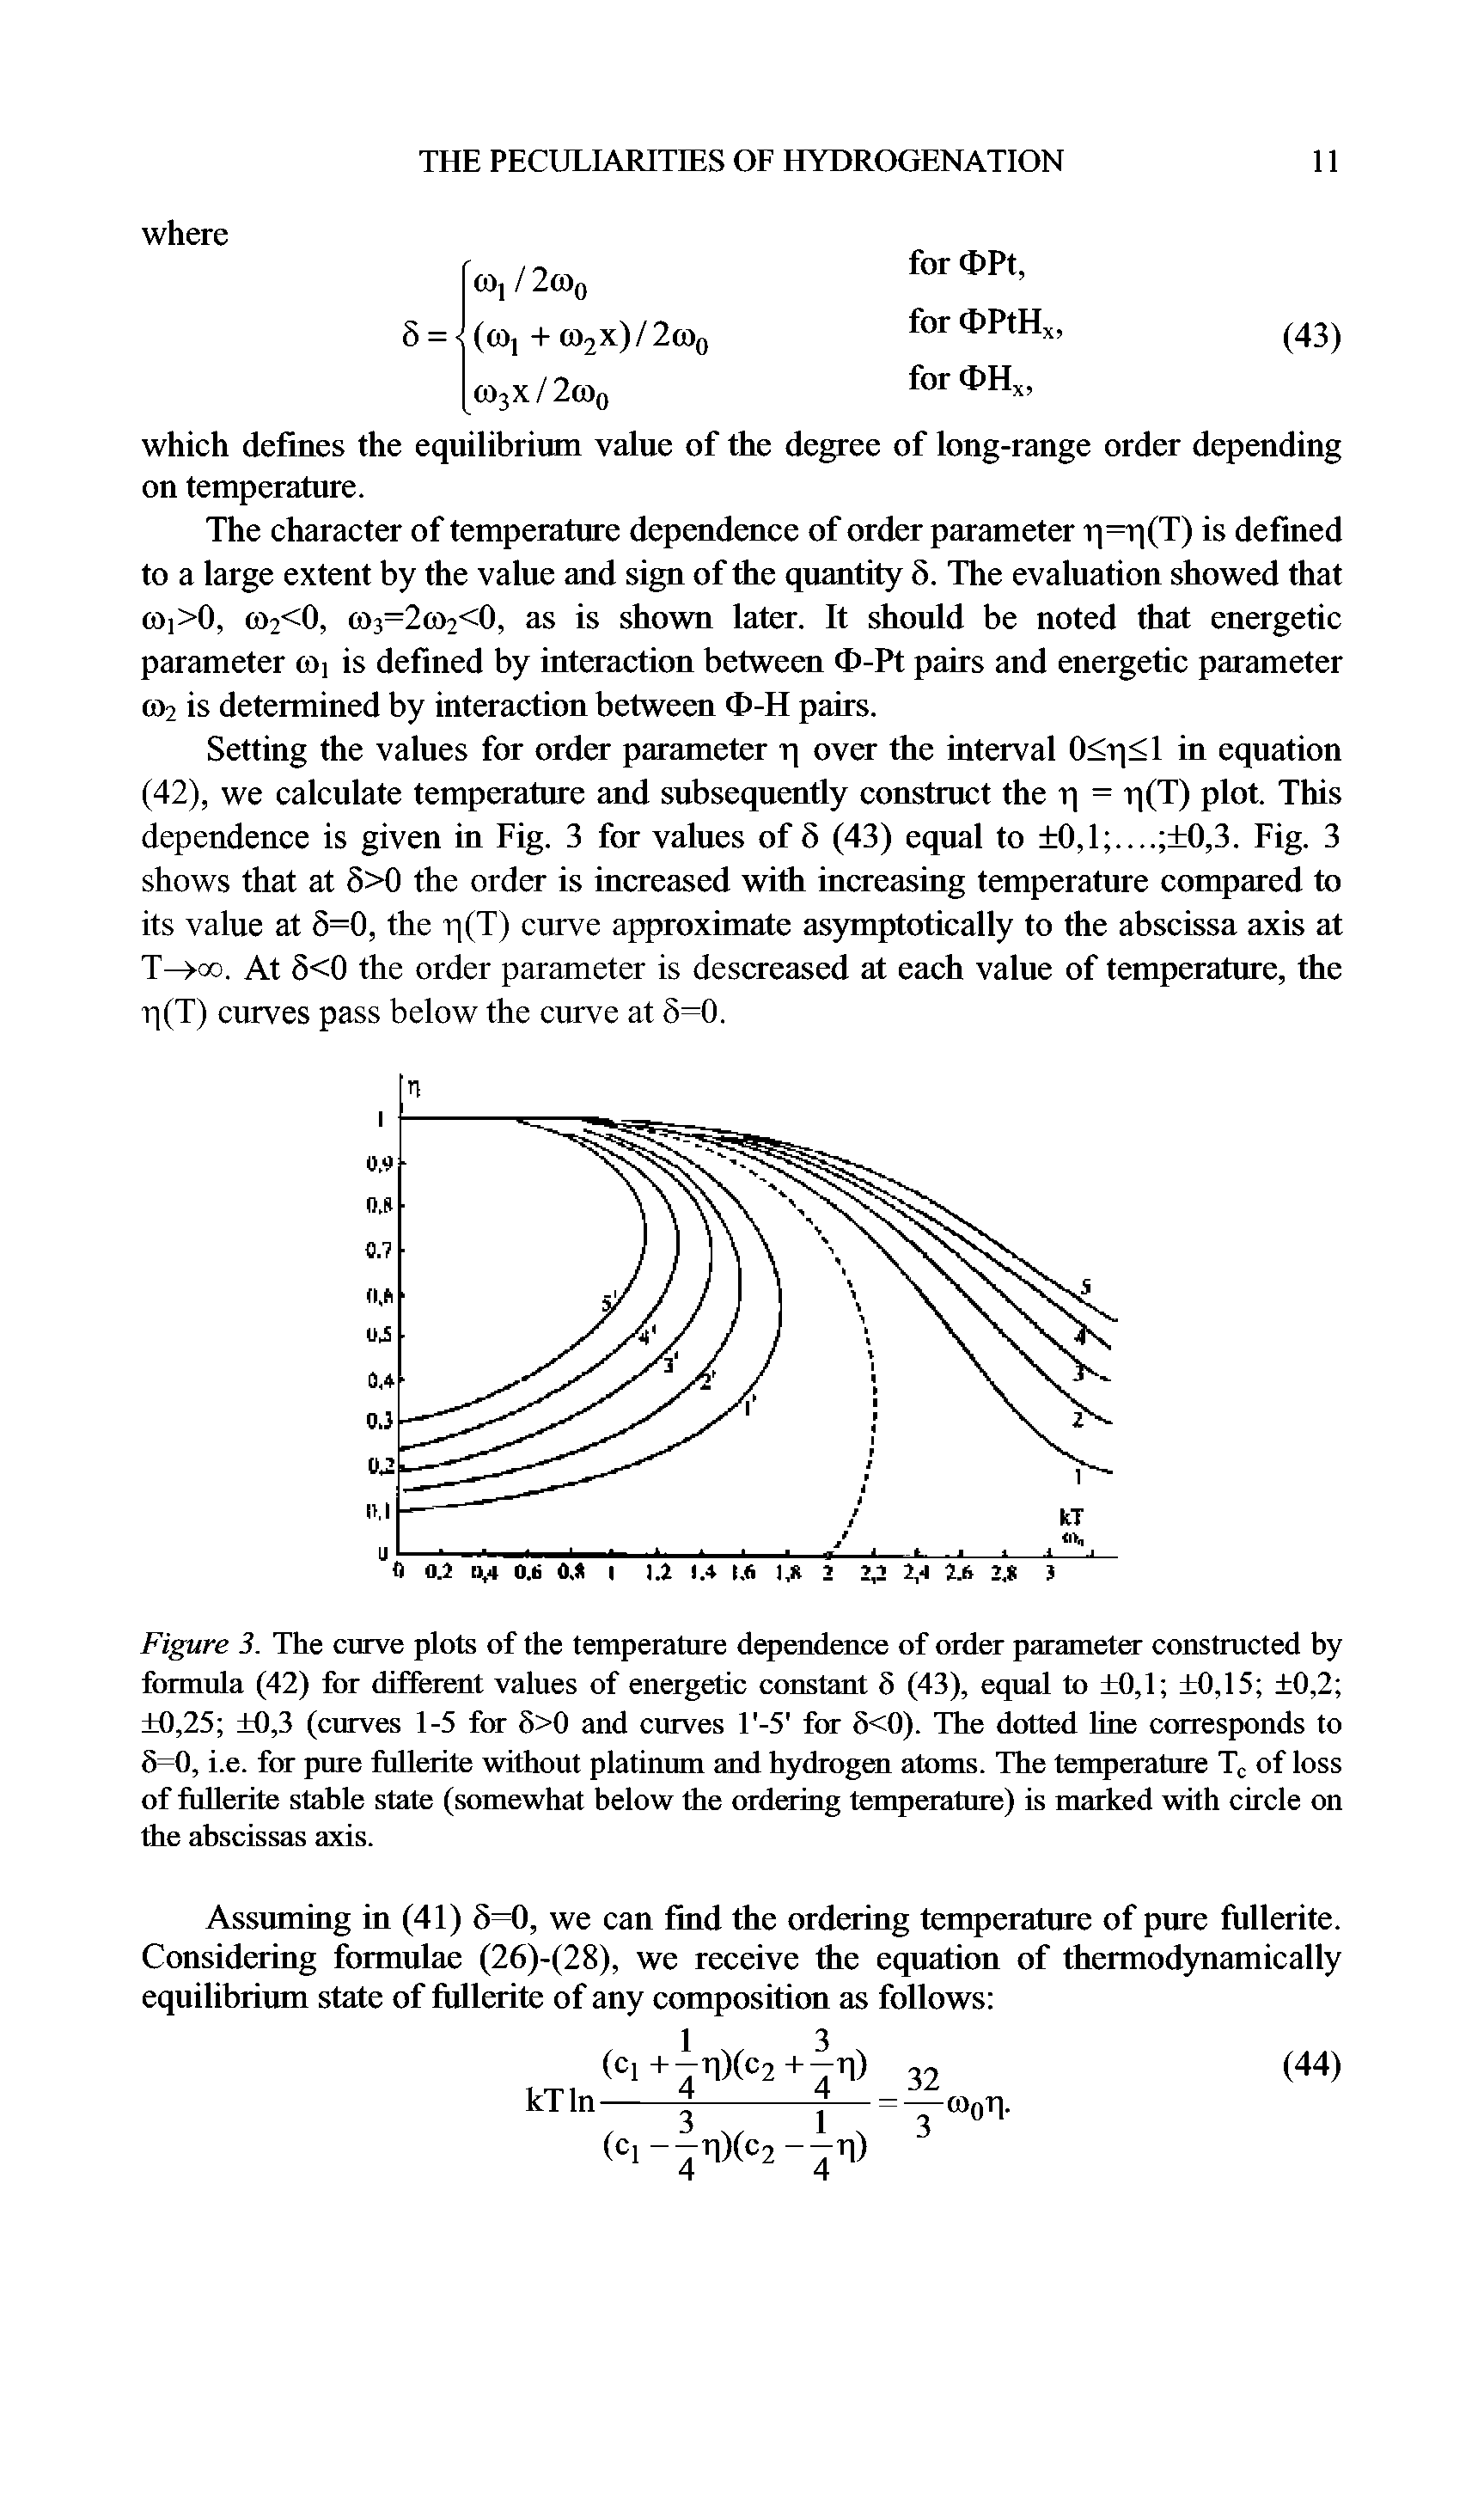 Figure 3. The curve plots of the temperature dependence of order parameter constmcted by formula (42) for different values of energetic constant 5 (43), equal to 0,1 +0,15 0,2 0,25 0,3 (curves 1-5 for 5>0 and curves l -5 for 5<0). The dotted line corresponds to 5=0, i.e. for pure fullerite without platinum and hydrogen atoms. The temperature Tc of loss of fullerite stable state (somewhat below the ordering temperature) is marked with circle on the abscissas axis.